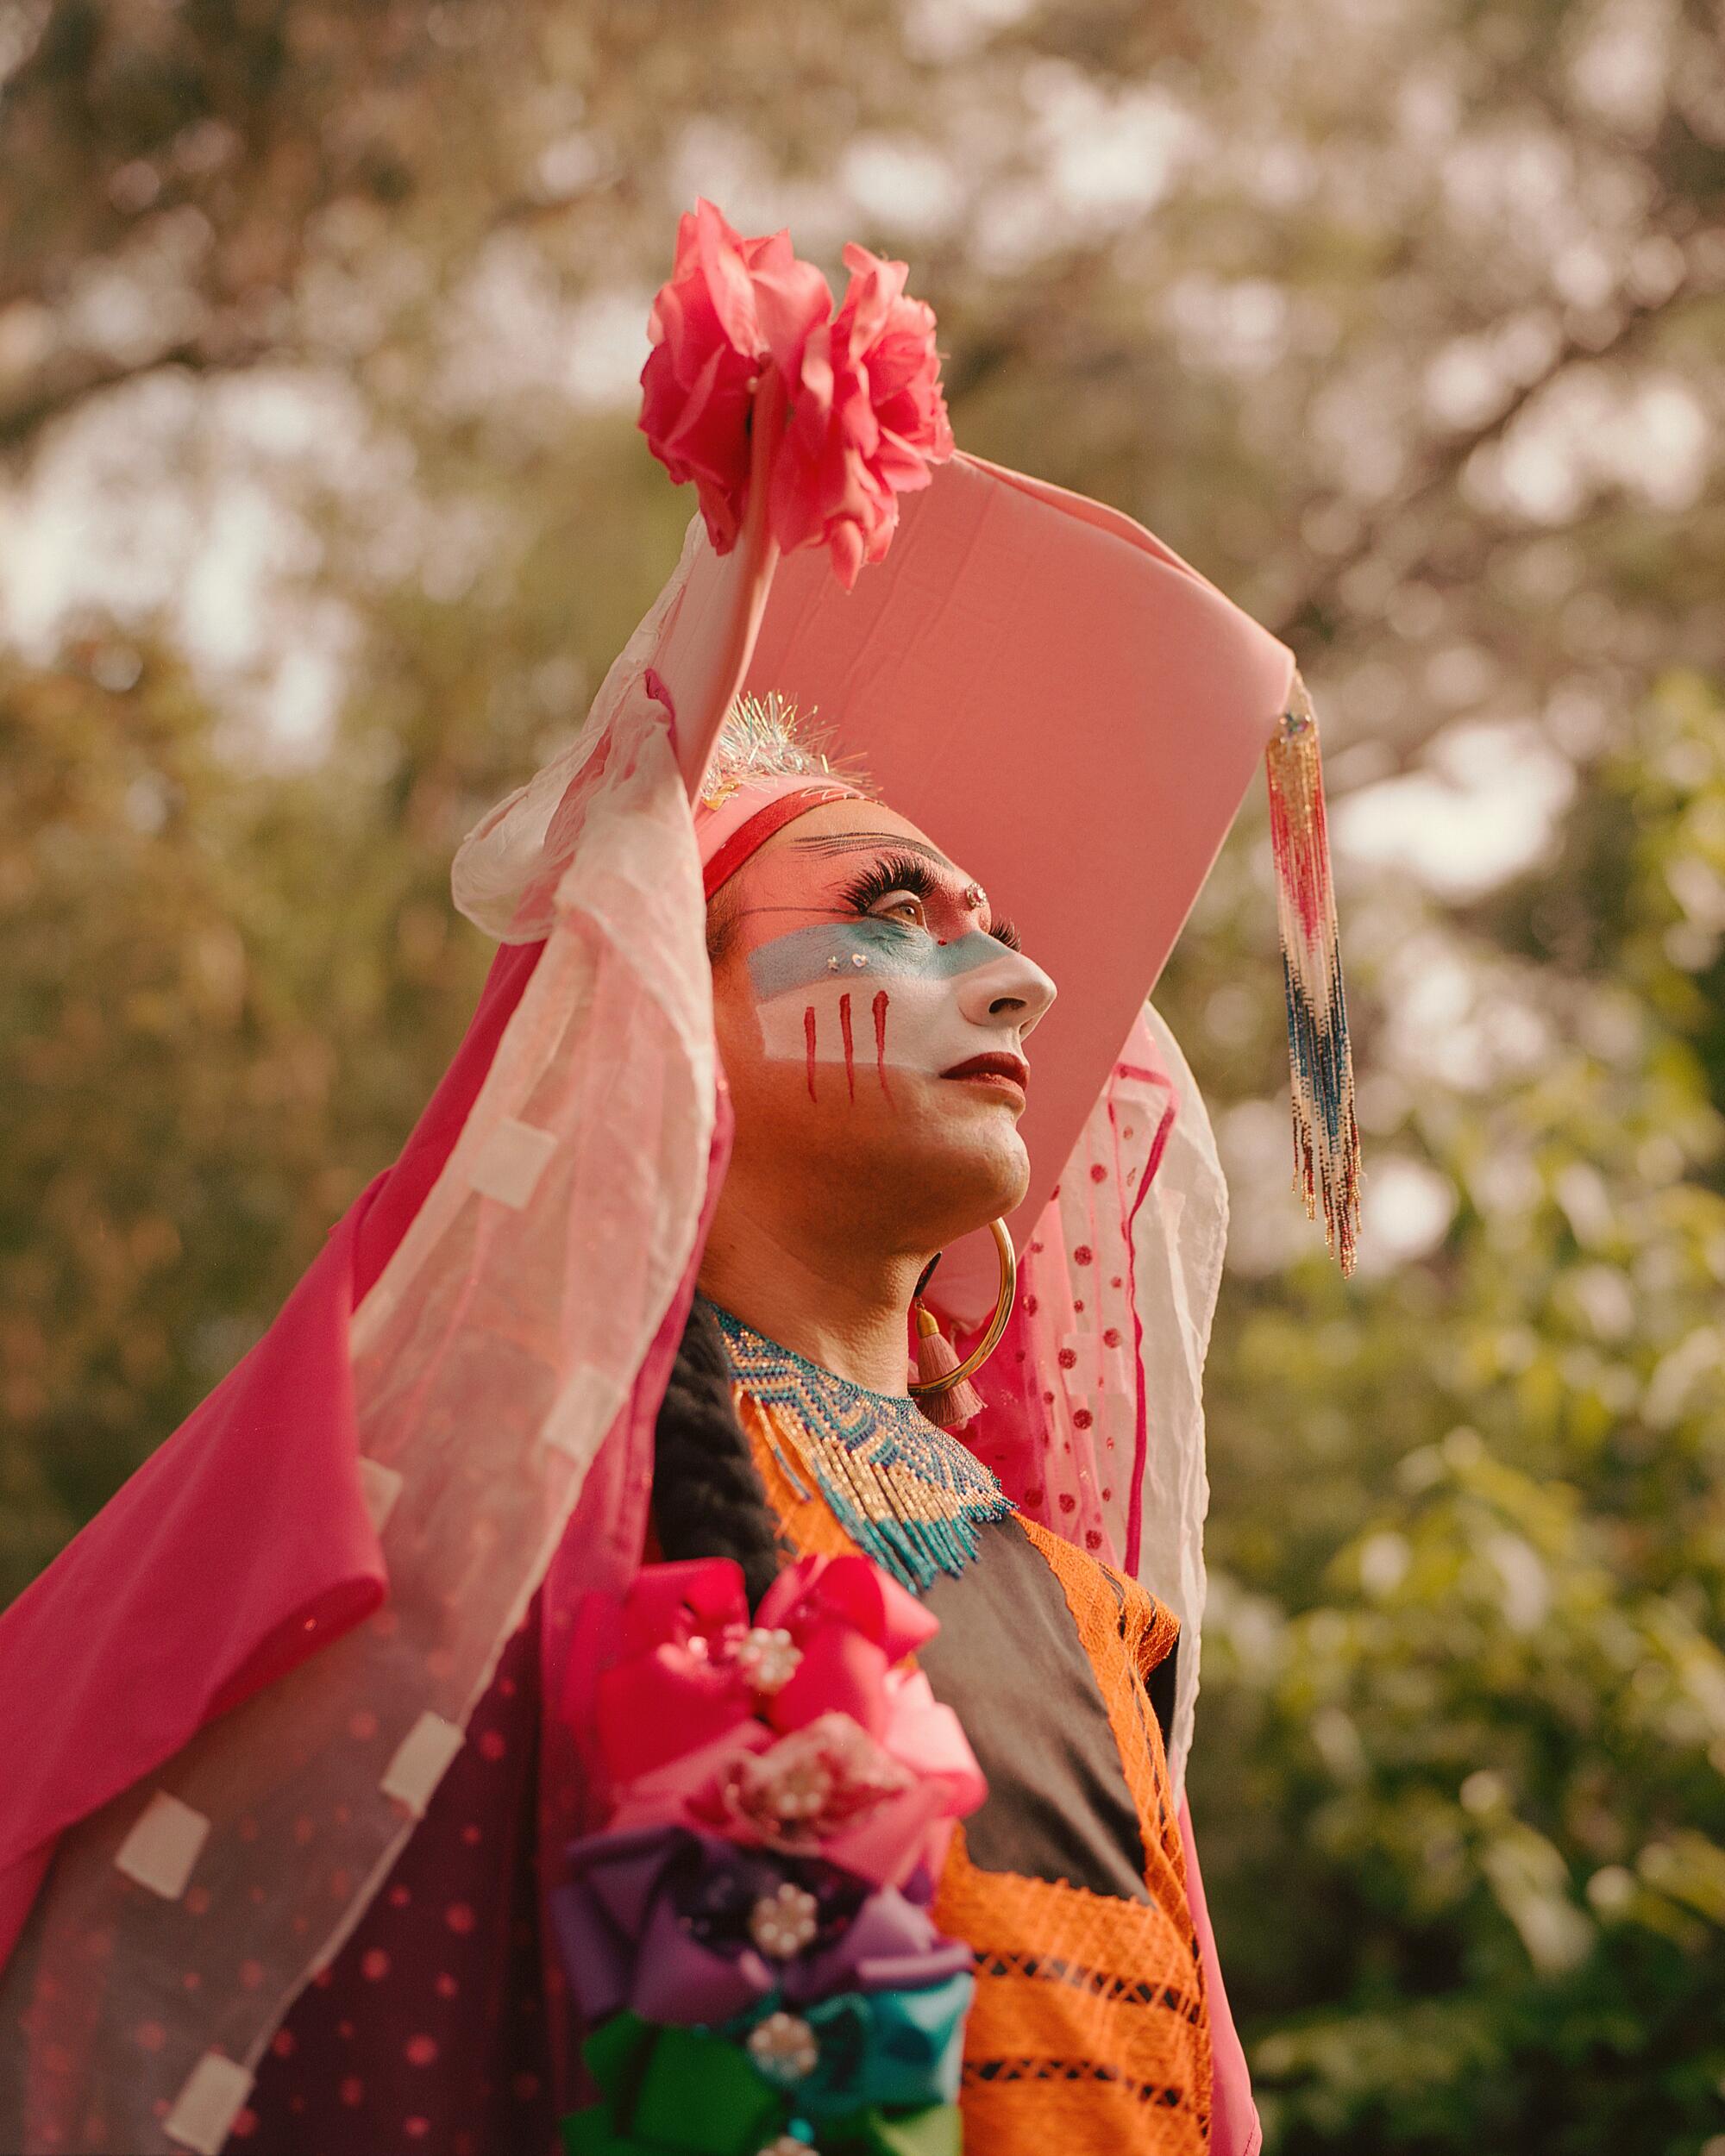 A drag nun in a peach outfit with colorful face paint stands outdoors looking up.